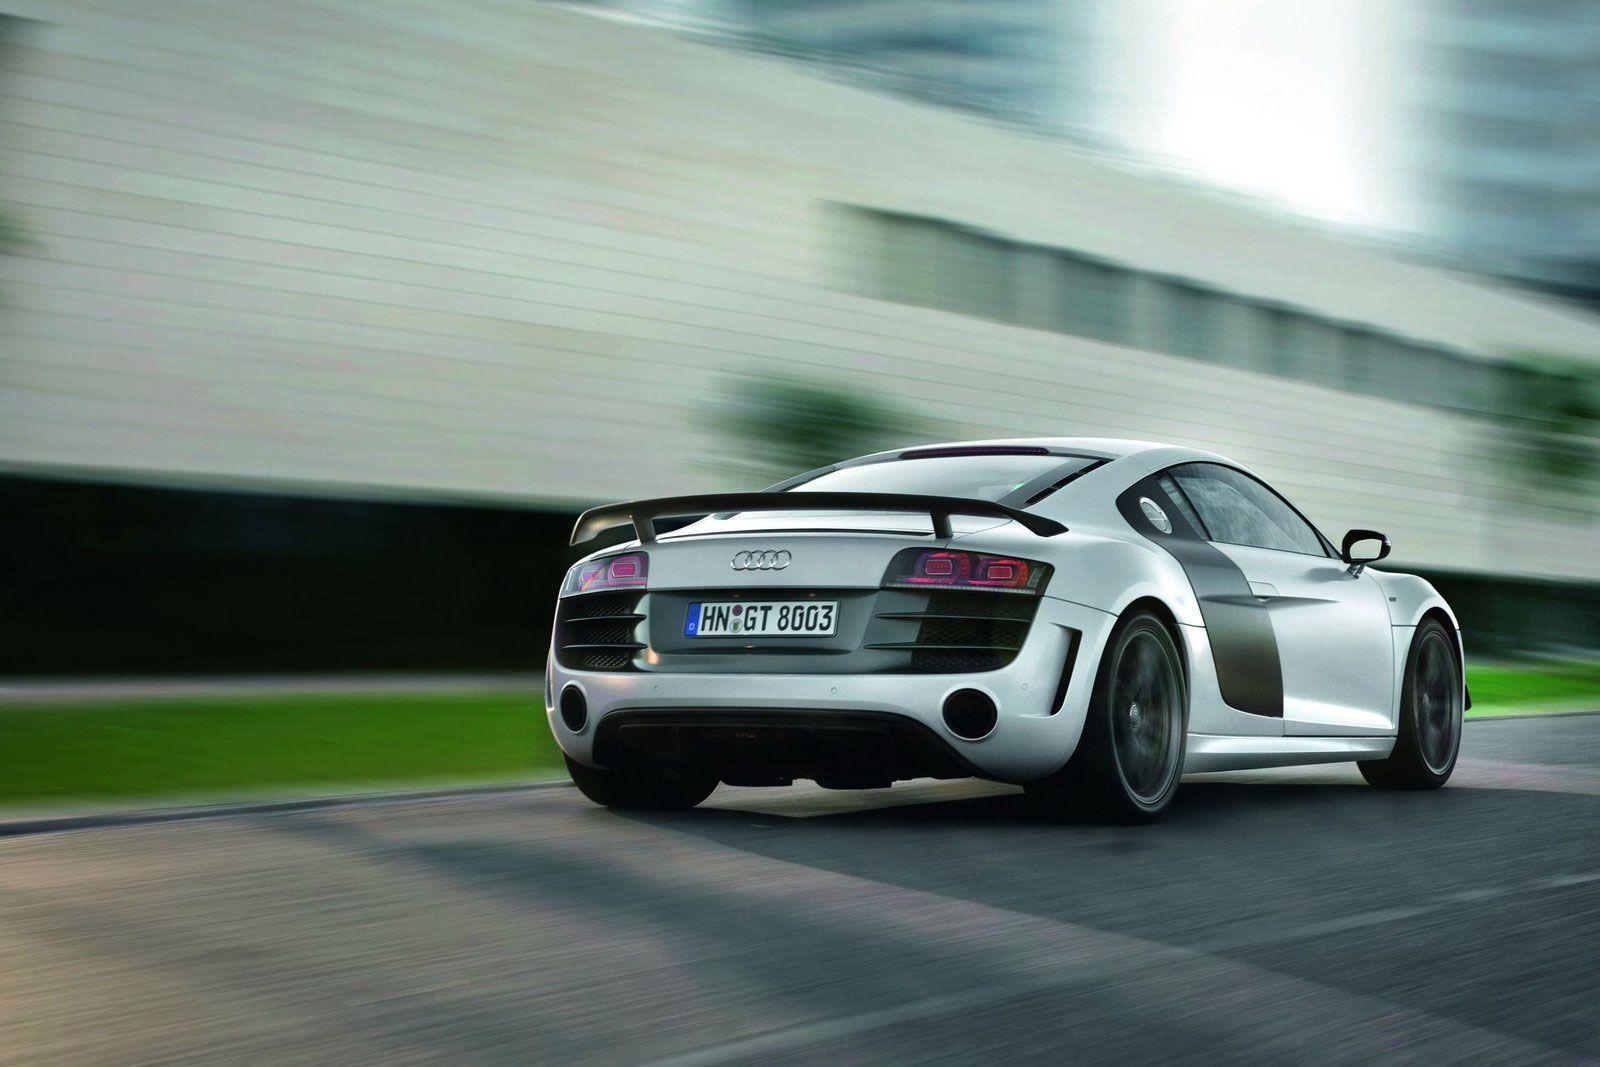 R8 Gt Wallpaper On The Road Side View Official Audi R8 Gt Sports